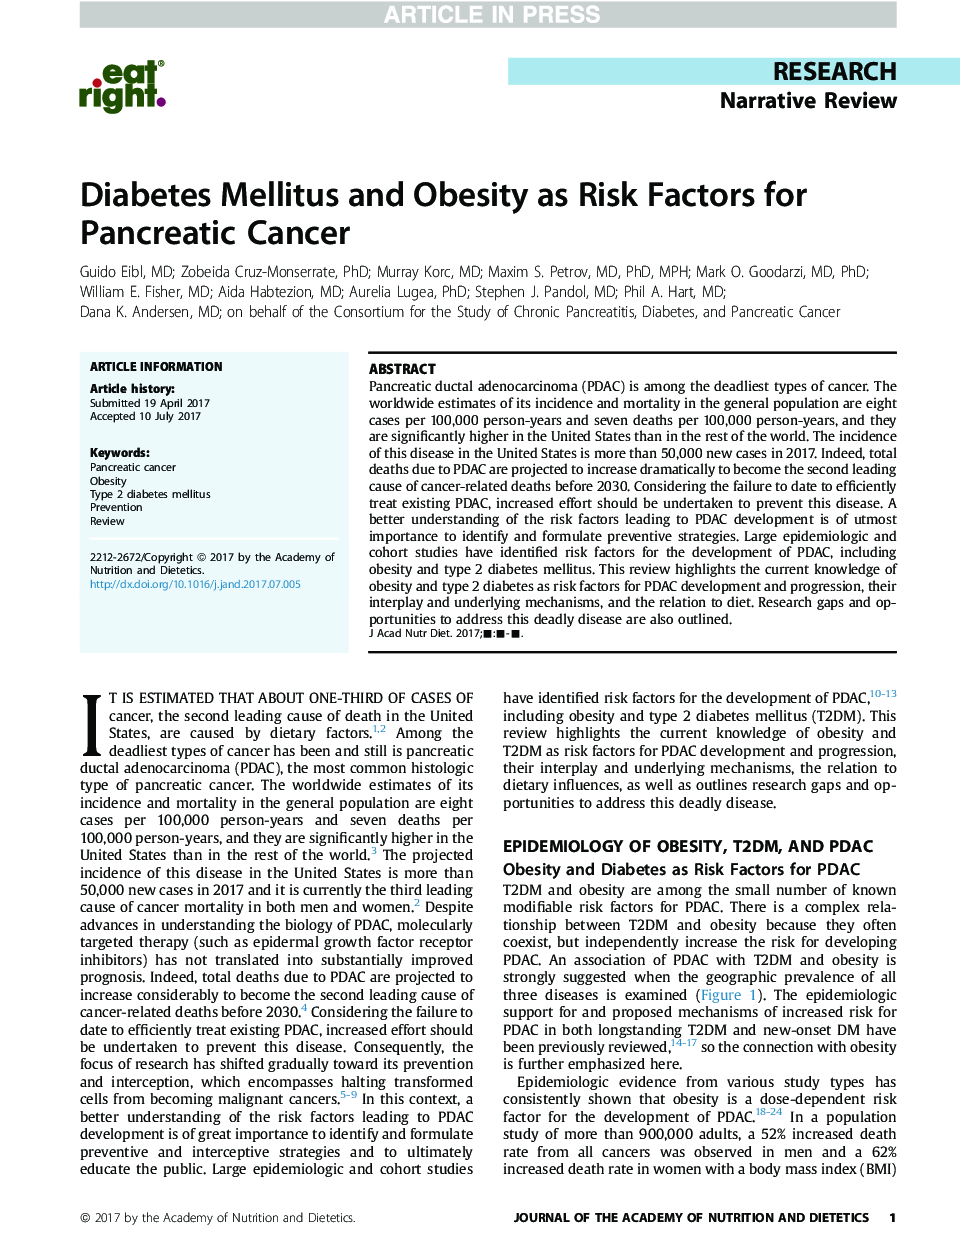 Diabetes Mellitus and Obesity as Risk Factors for Pancreatic Cancer